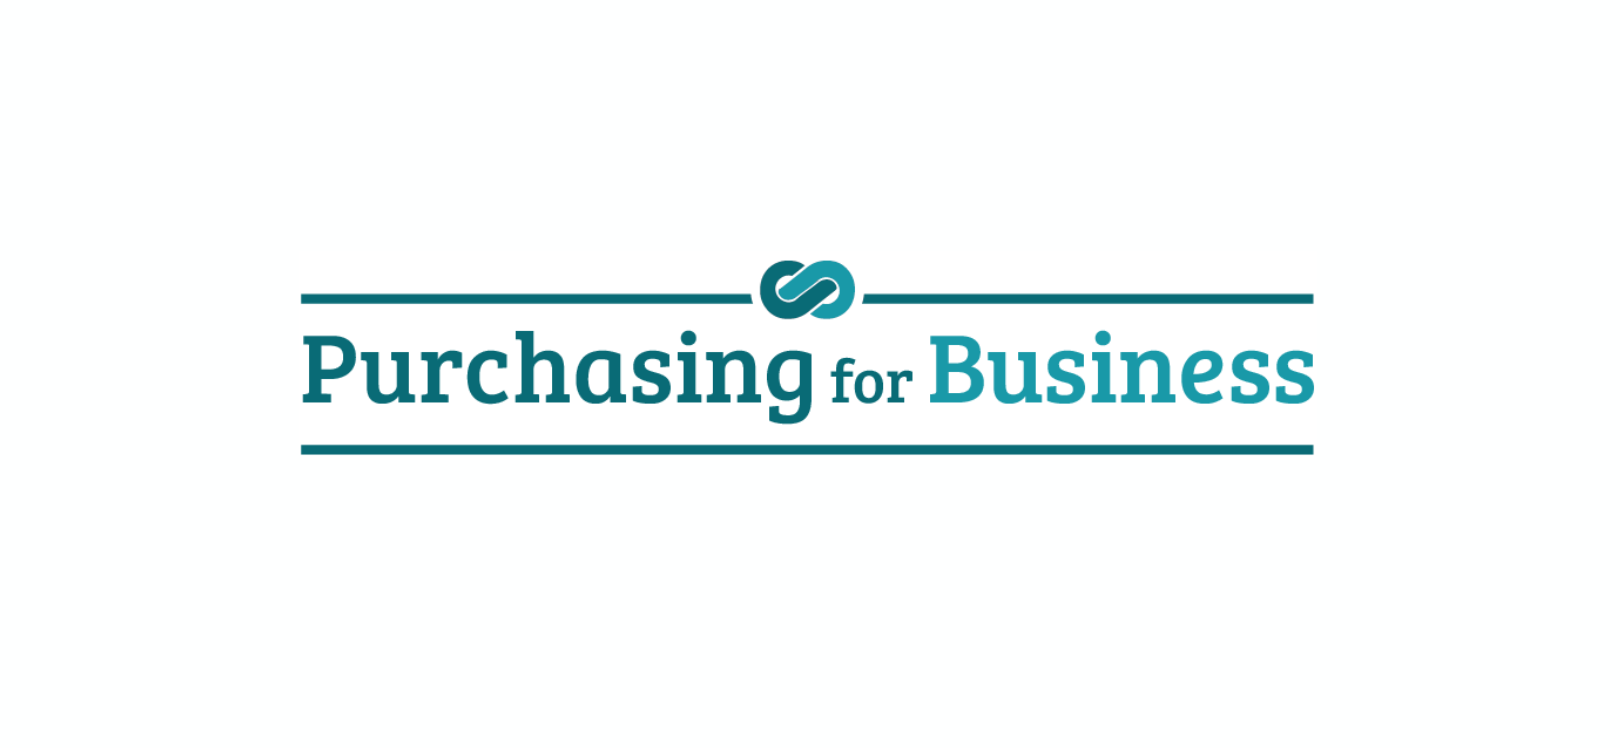 Purchasing for Business logo